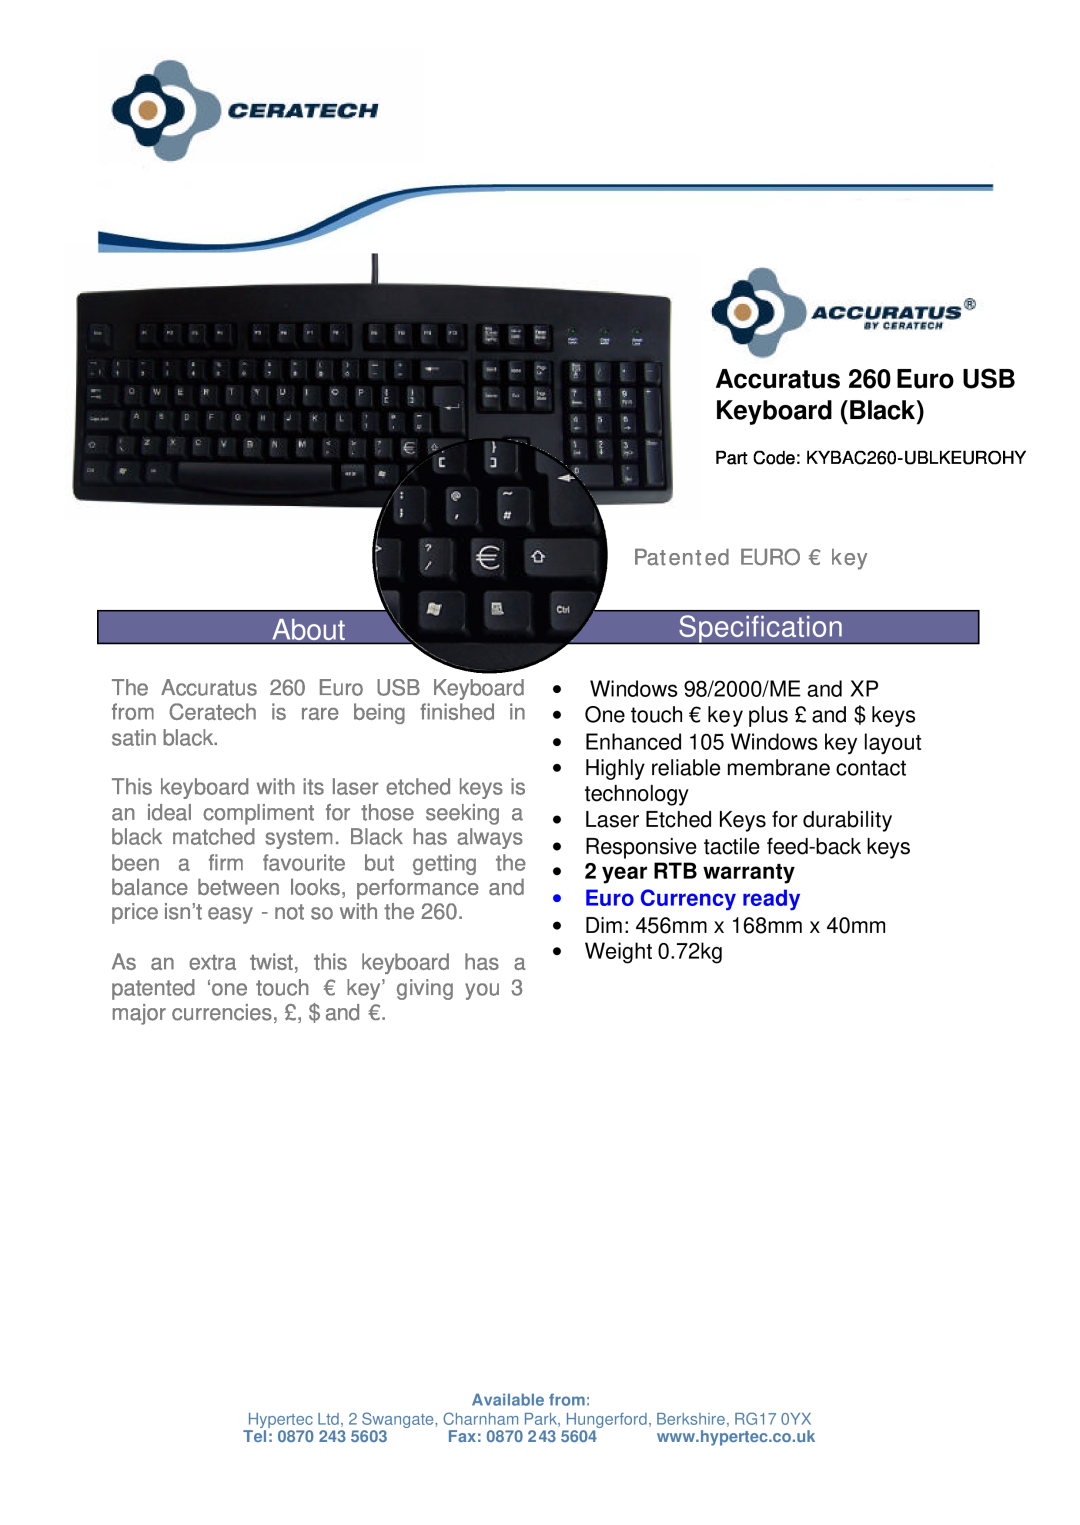 Hypertec KYBAC260-UBLKEUROHY warranty About, Specification, Accuratus 260 Euro USB Keyboard Black, Patented EURO € key 